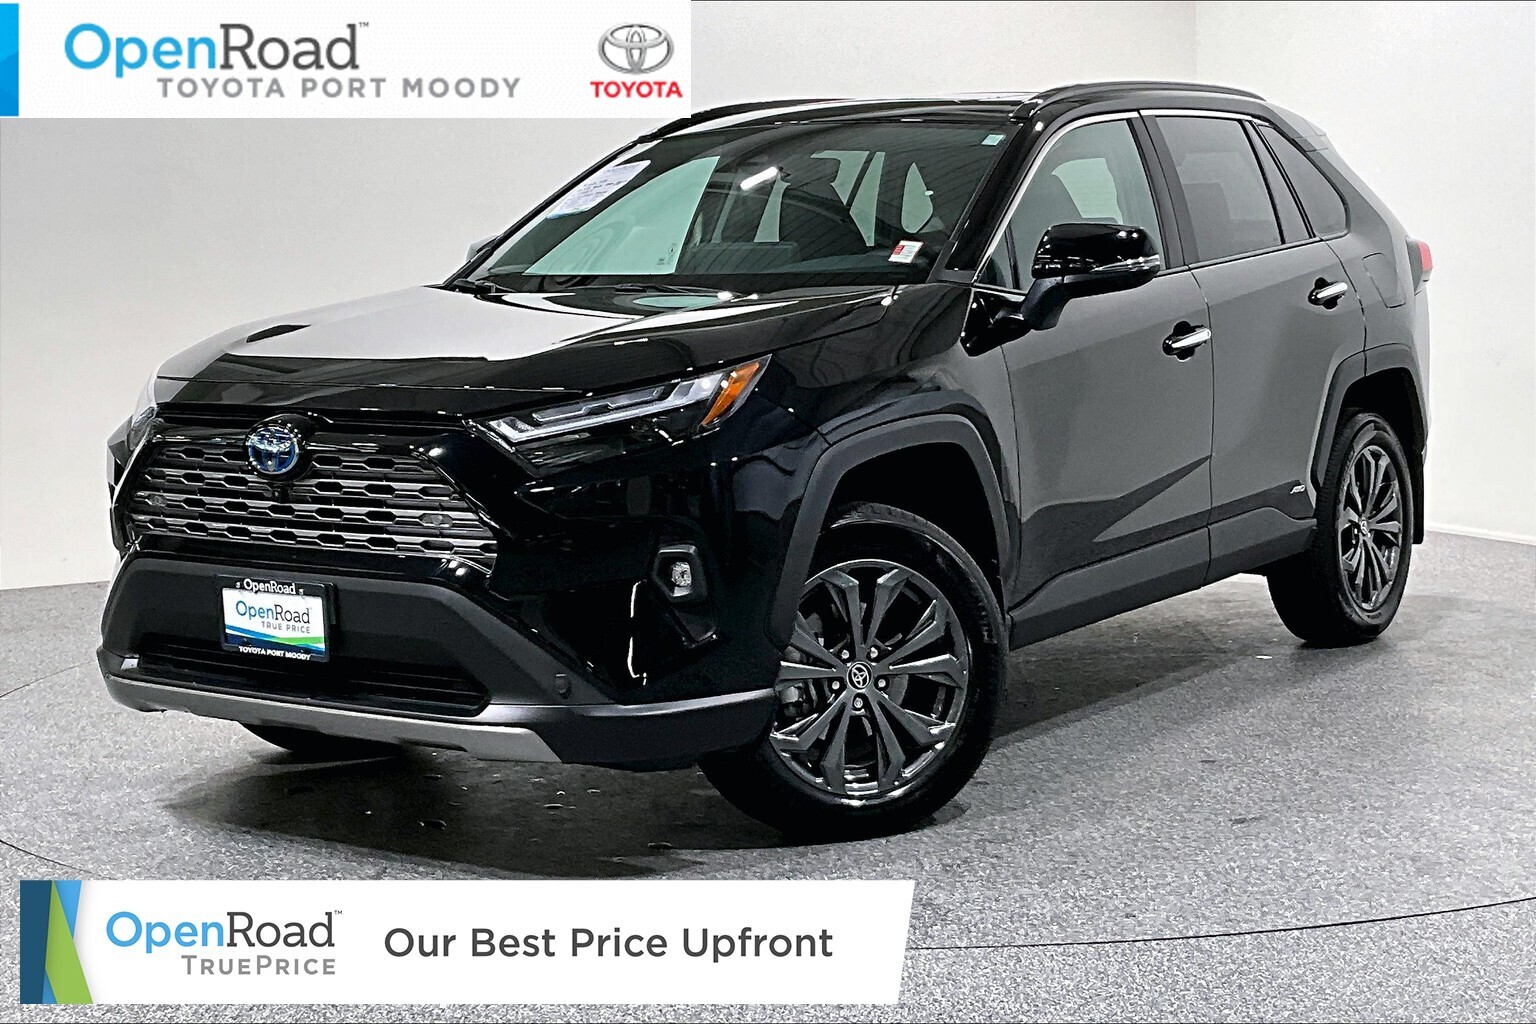 2023 Toyota RAV4 Hybrid Limited AWD |OpenRoad True Price |Local |One Owner